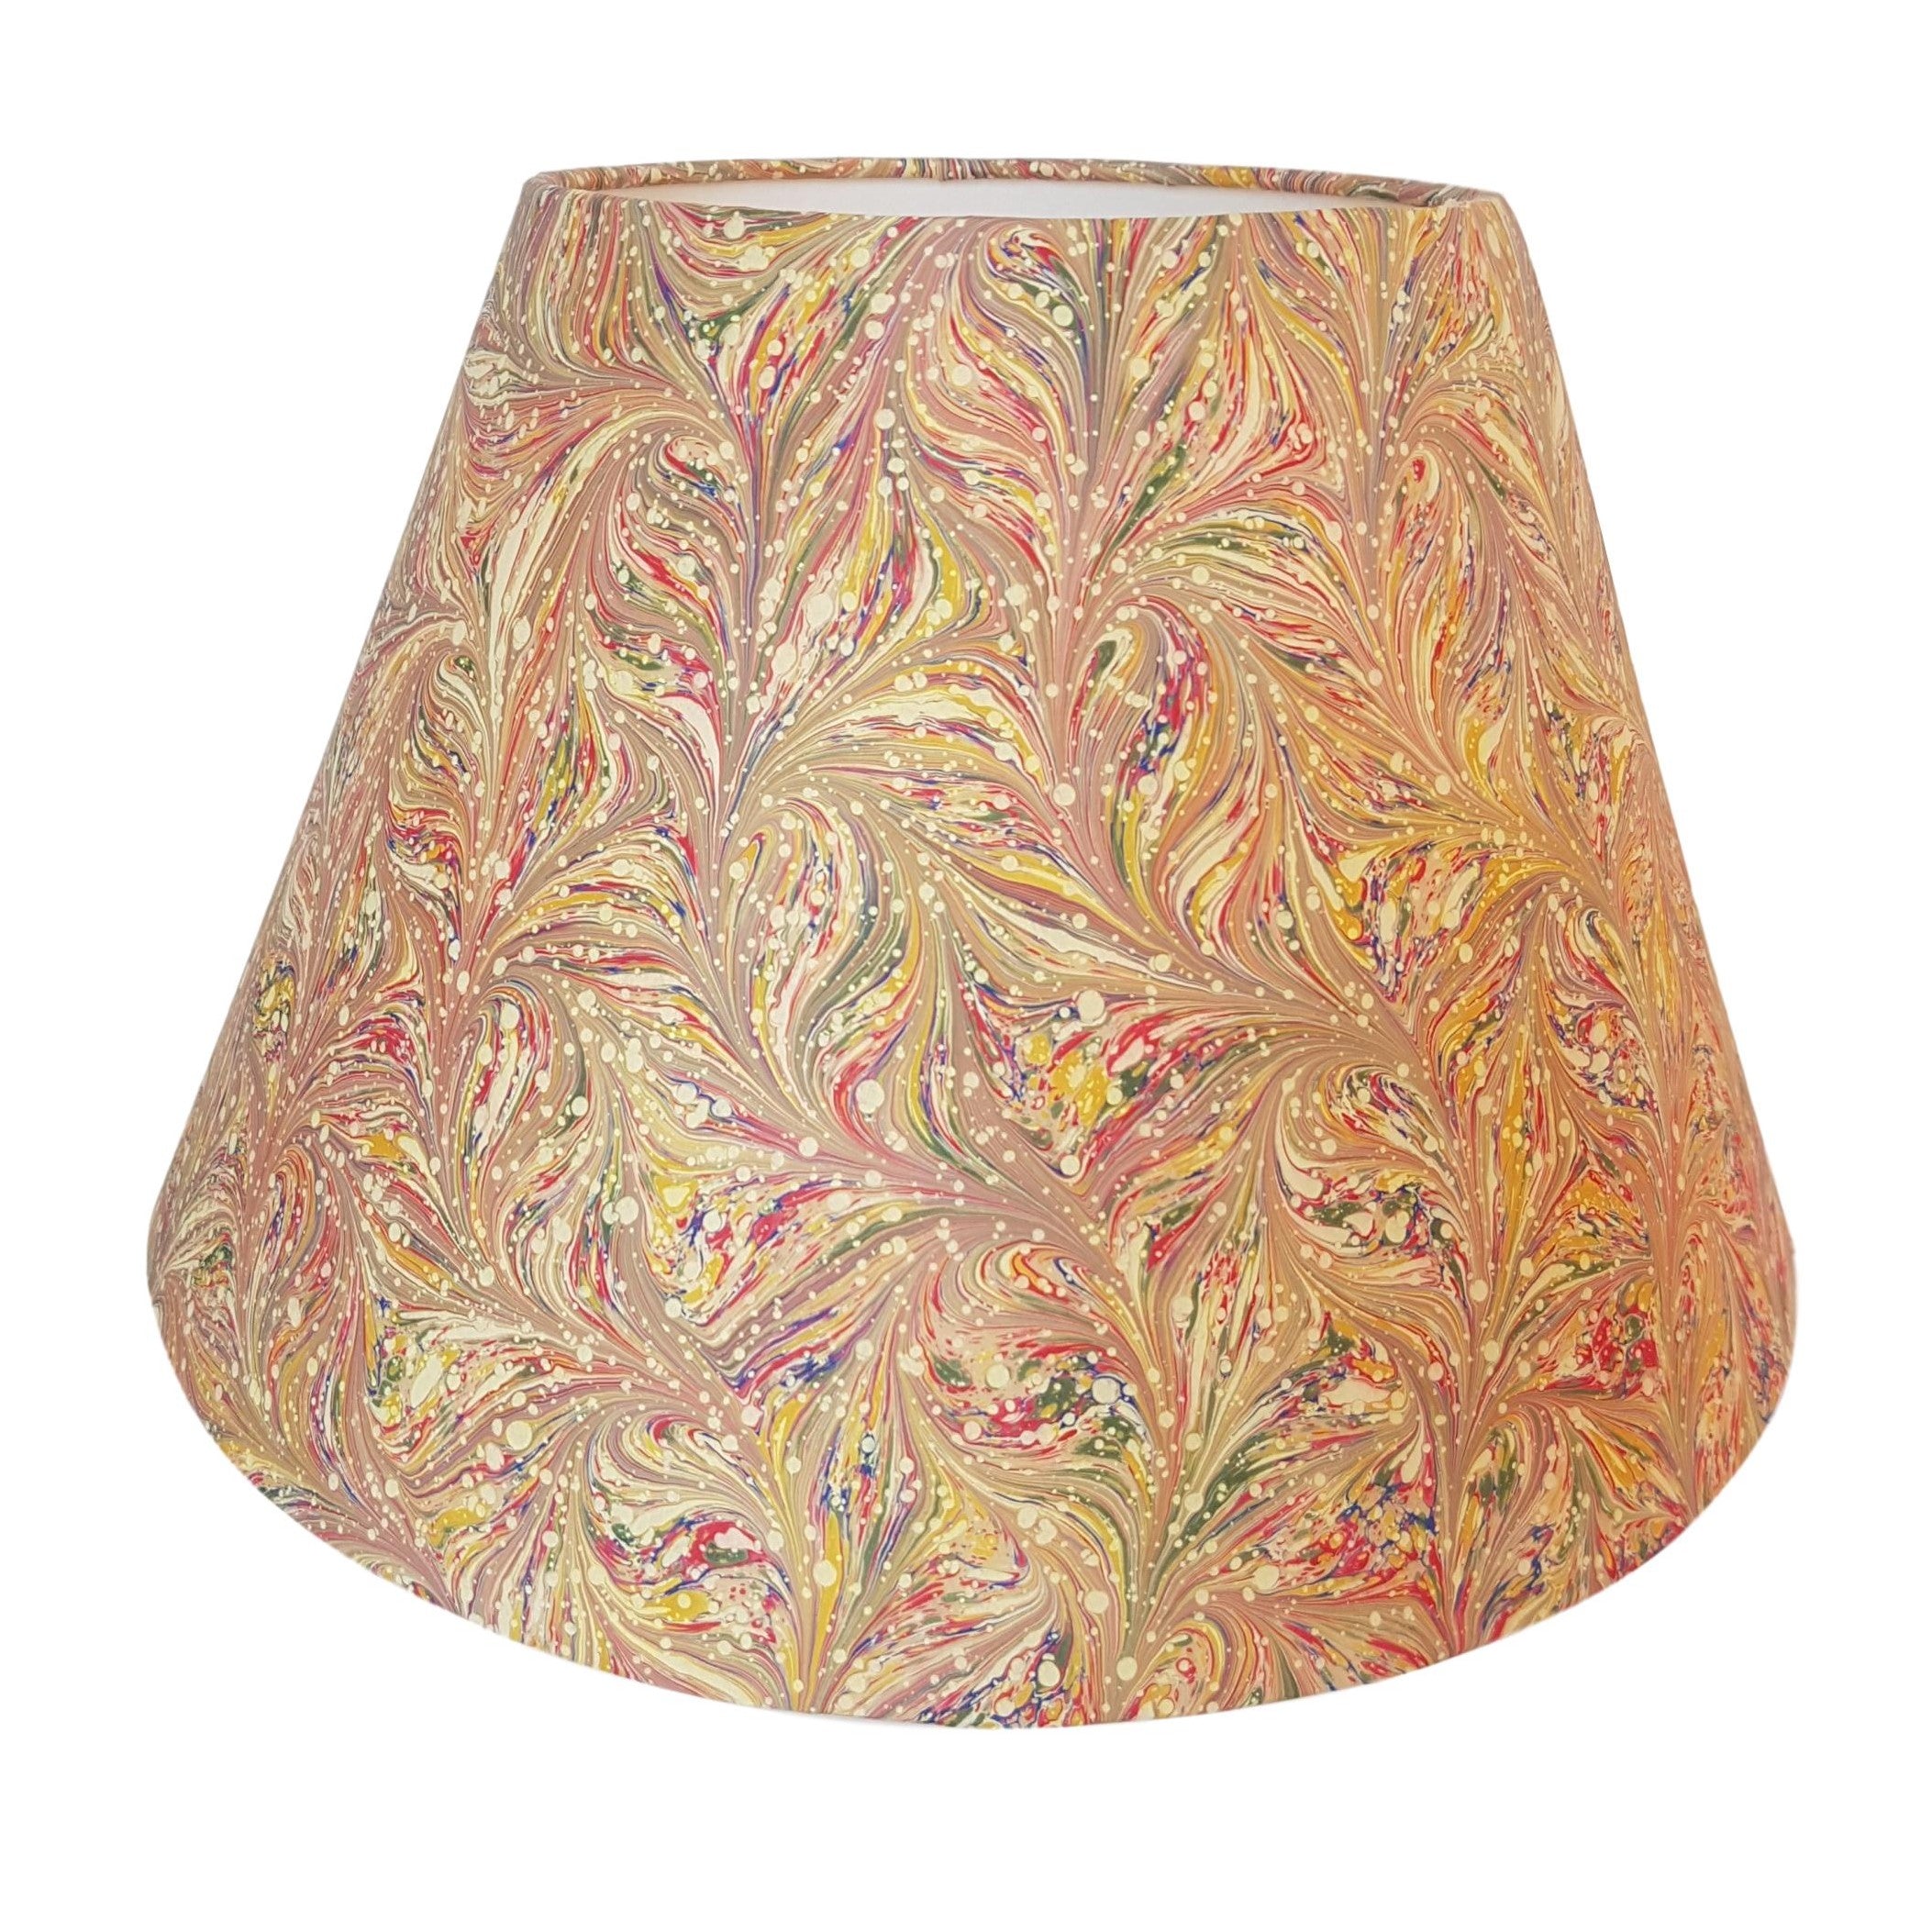 Munro and Kerr combed pink multicolour marbled paper empire lampshade